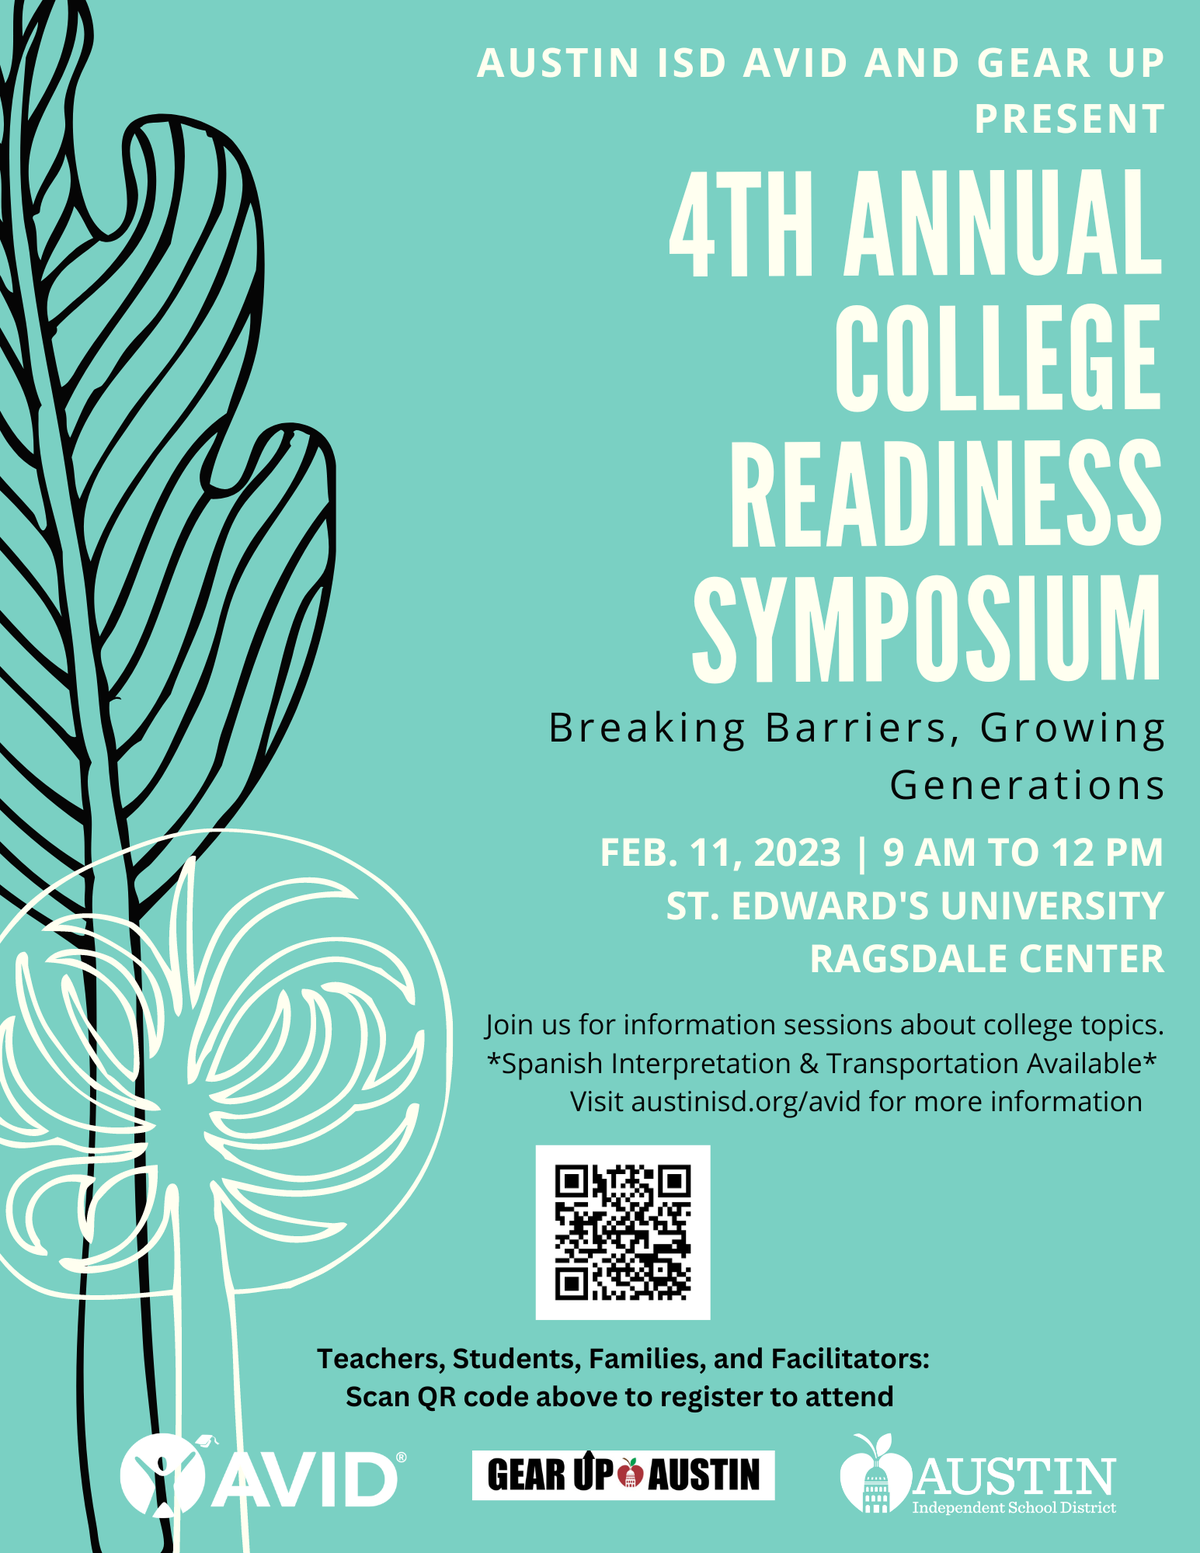 4th annual college readiness symposium St. Edward's